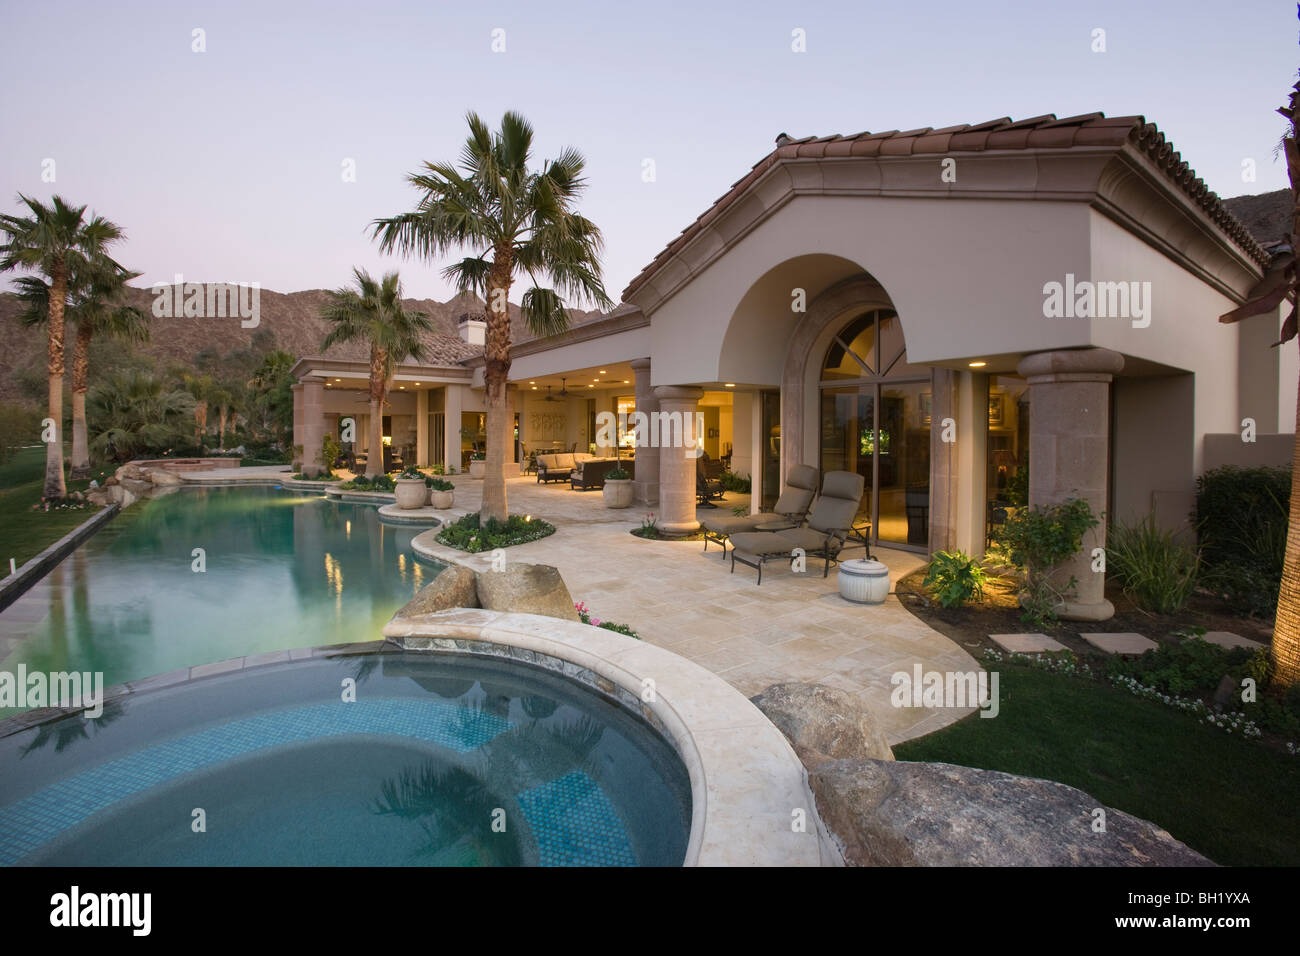 Luxury swimming pool and house exterior at dusk Stock Photo